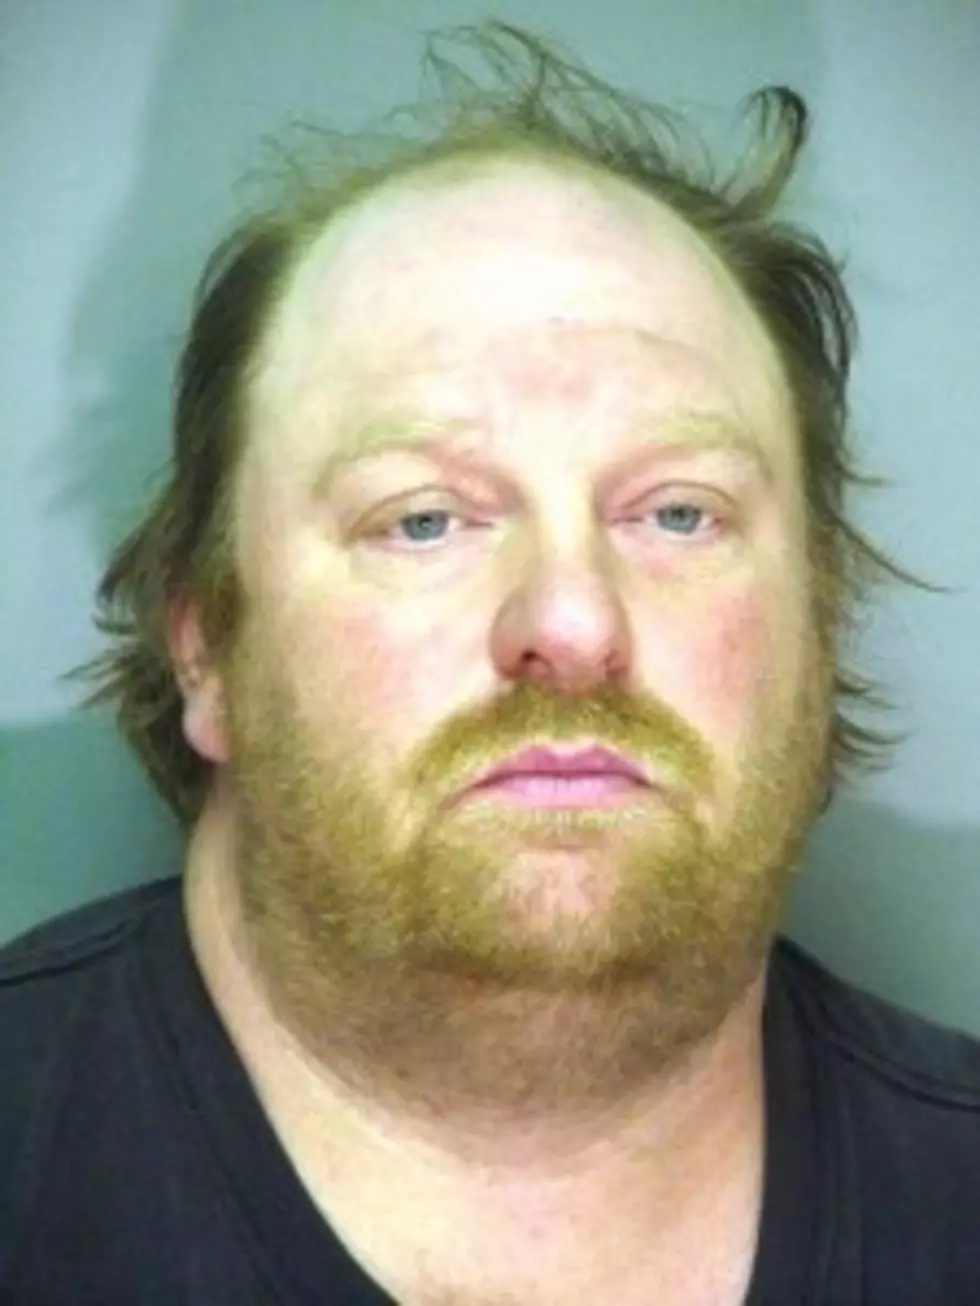 State Police Say 38-Year-Old Man Raped 13-Year-Old Girl